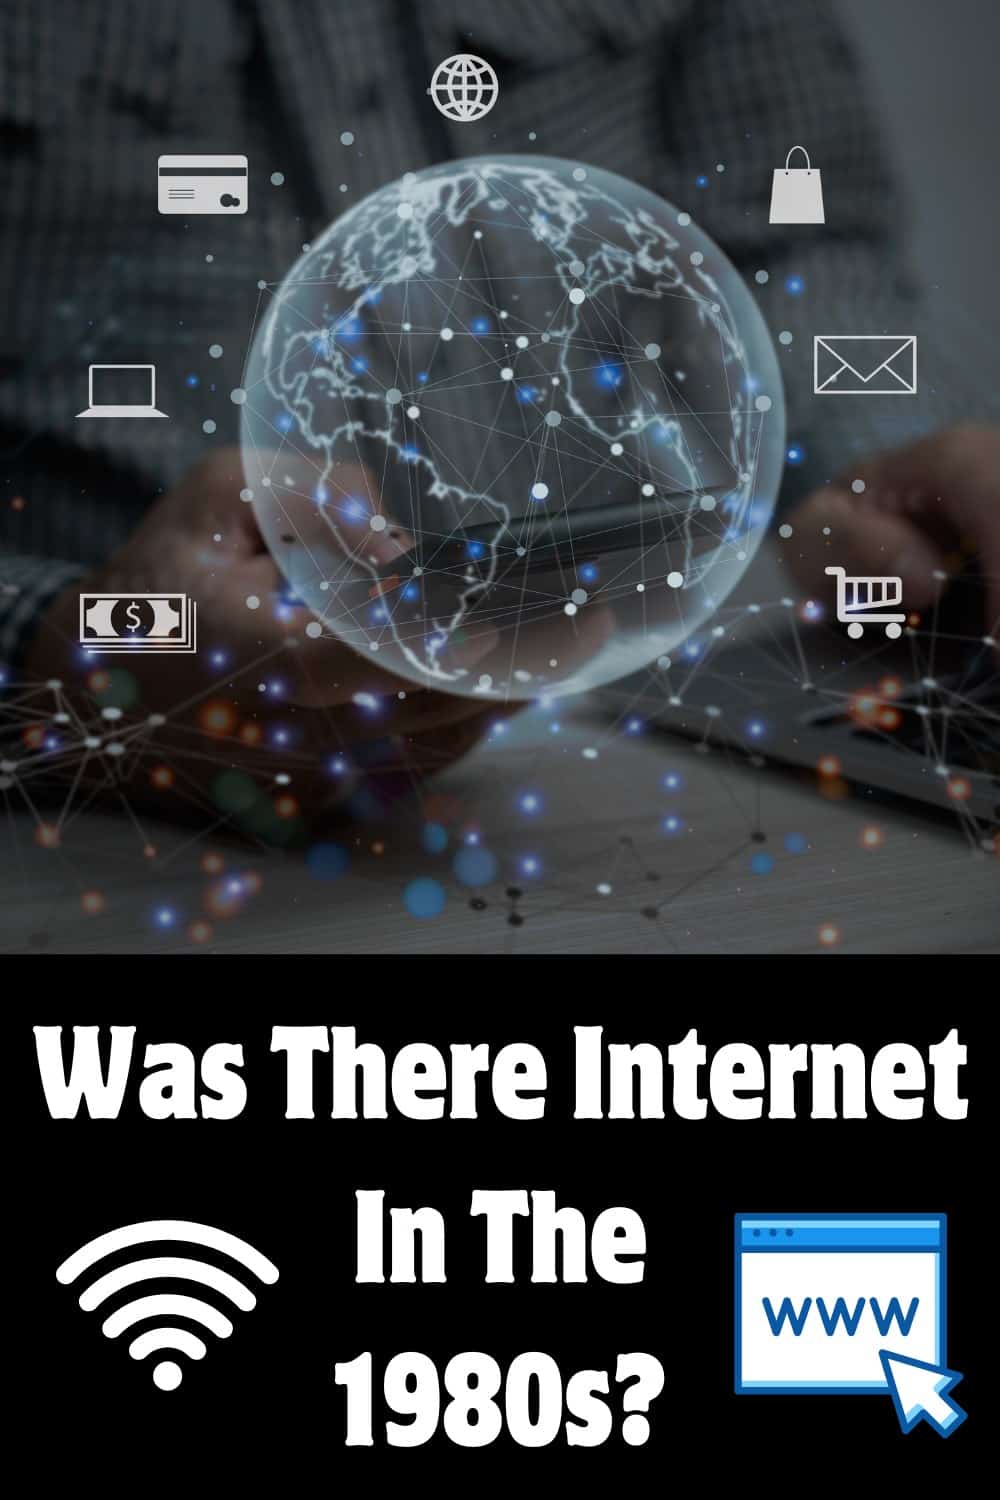 The internet as we know it today did not exist in the 80s